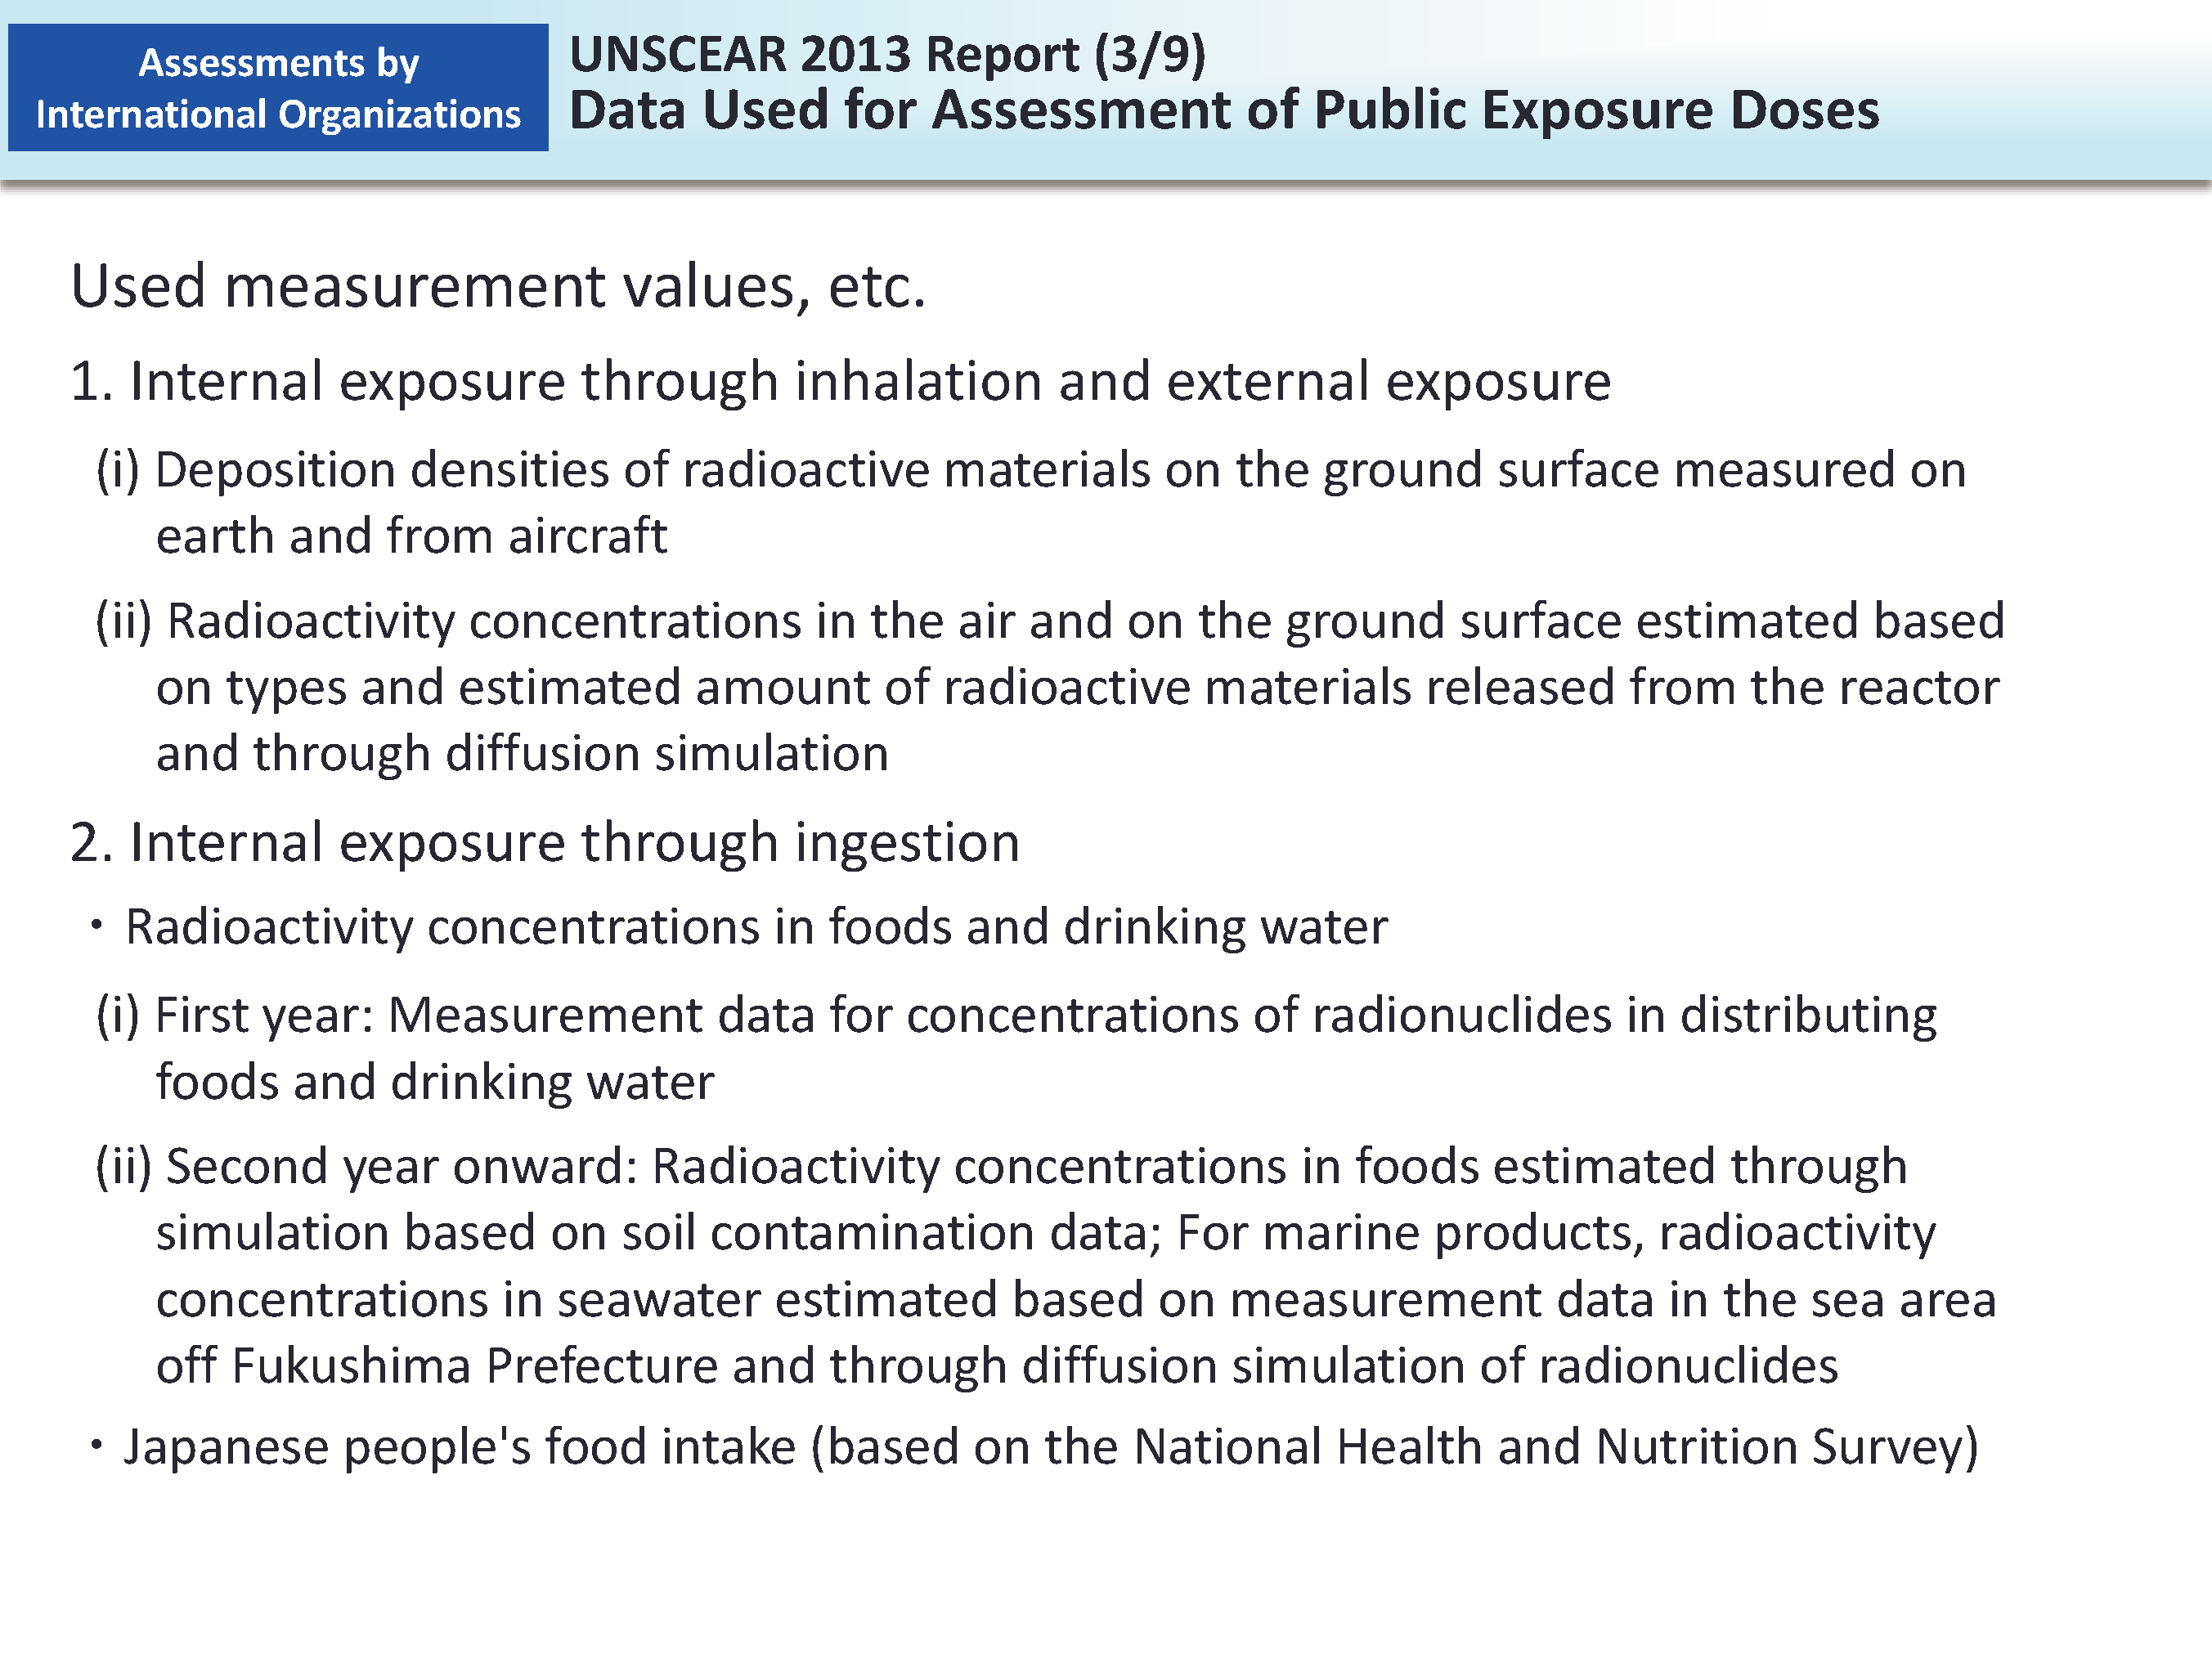 UNSCEAR 2013 Report (3/9) Data Used for Assessment of Public Exposure Doses_Figure